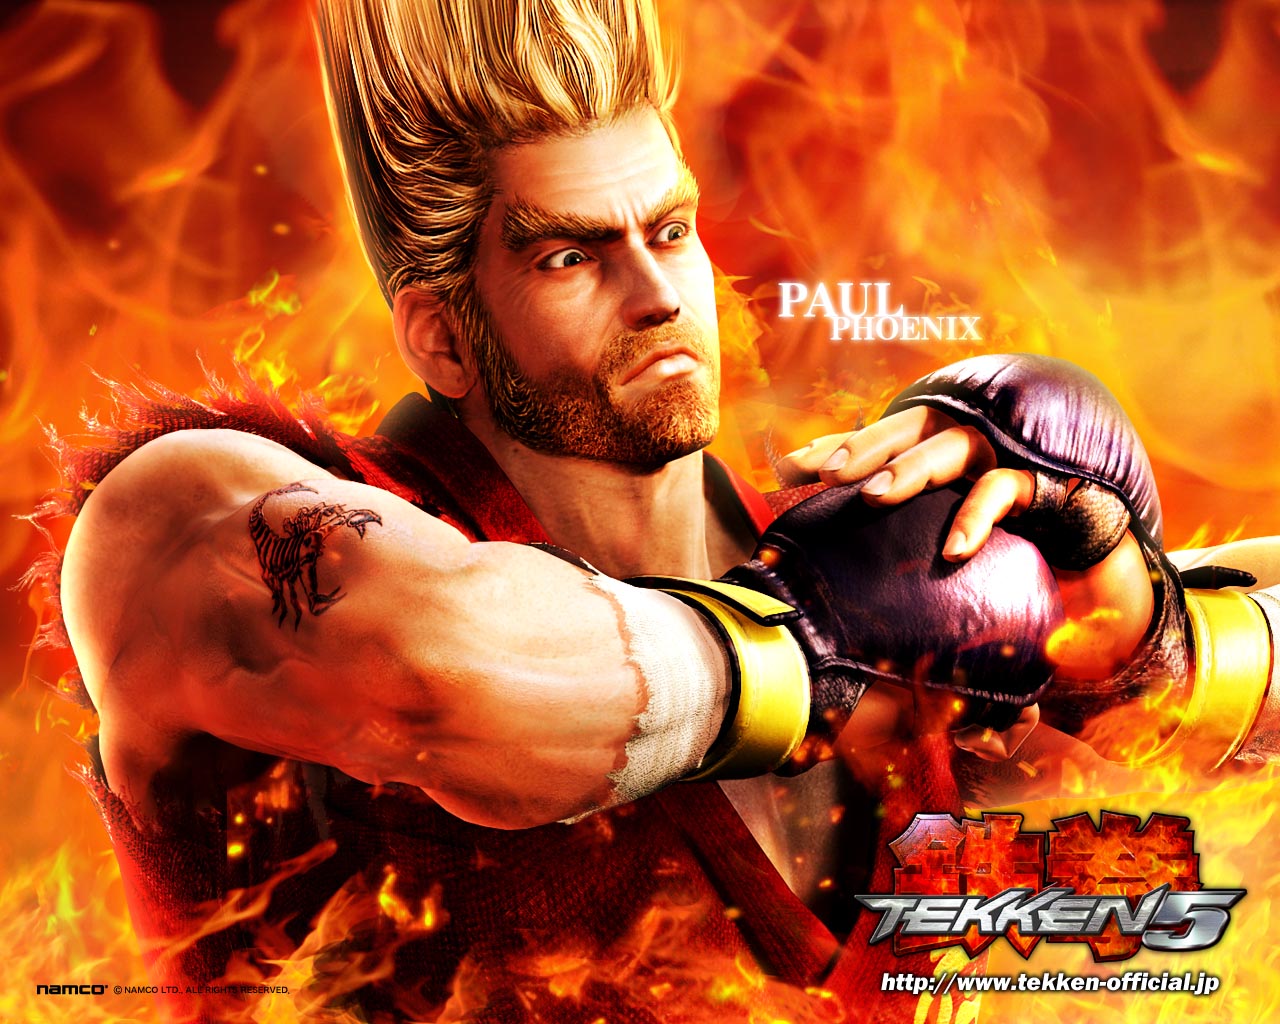 HD wallpapers Tekken 5 Game HD Wallpapers all characters in 1280x1024 1280x1024